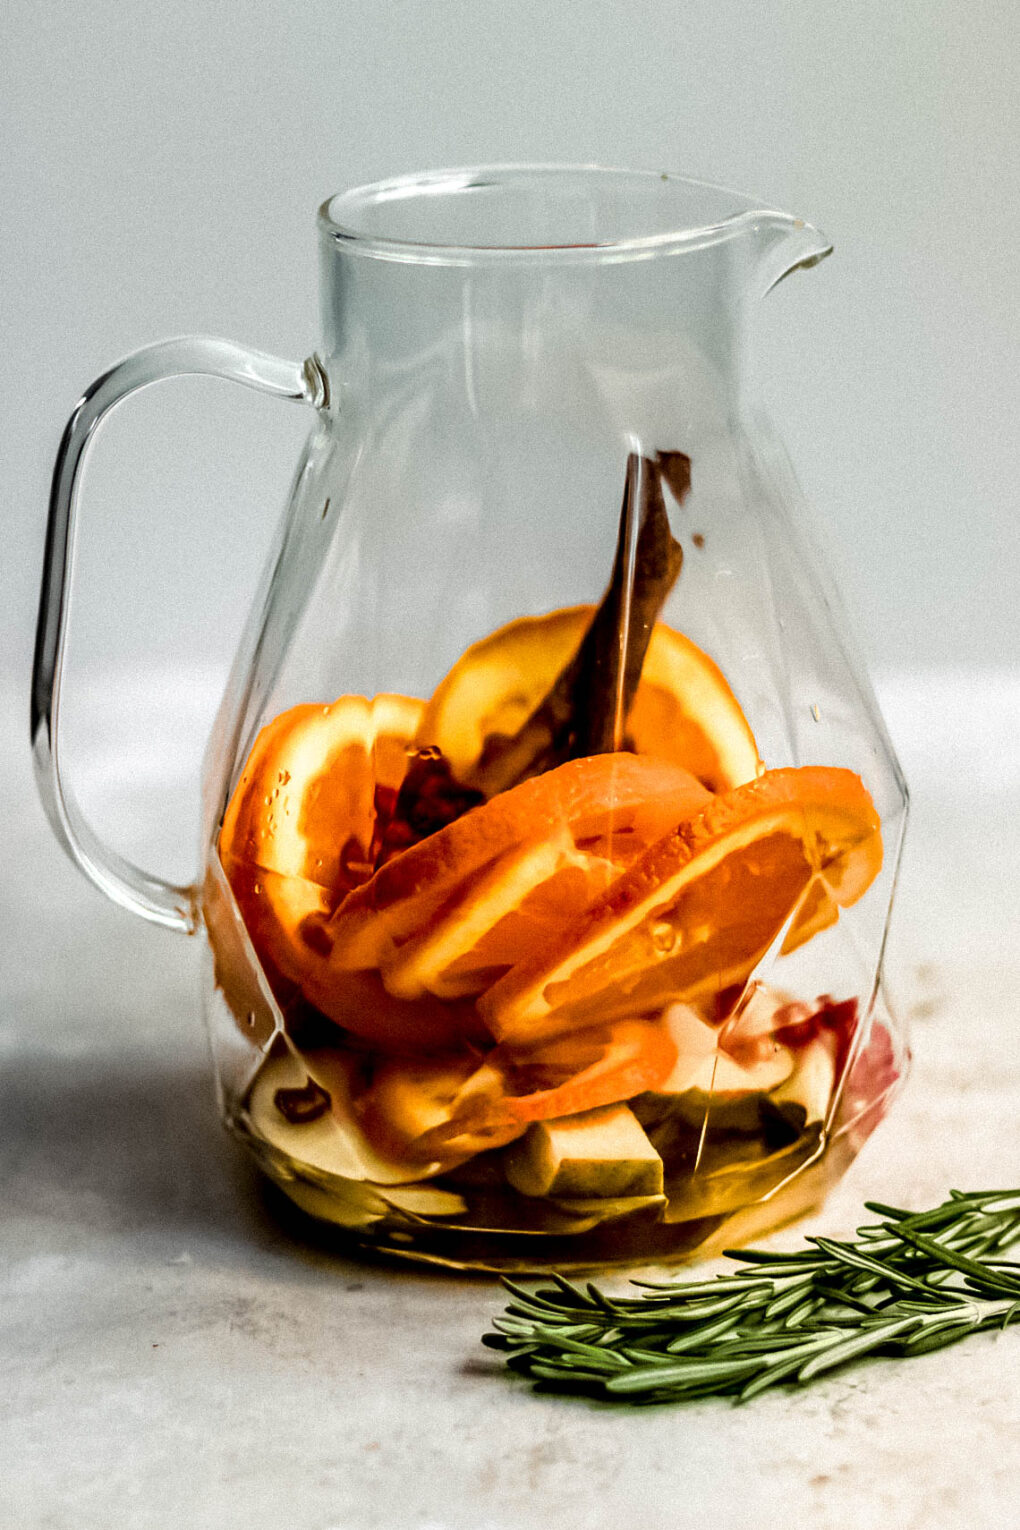 ingredients to make Christmas sangria in a glass pitcher